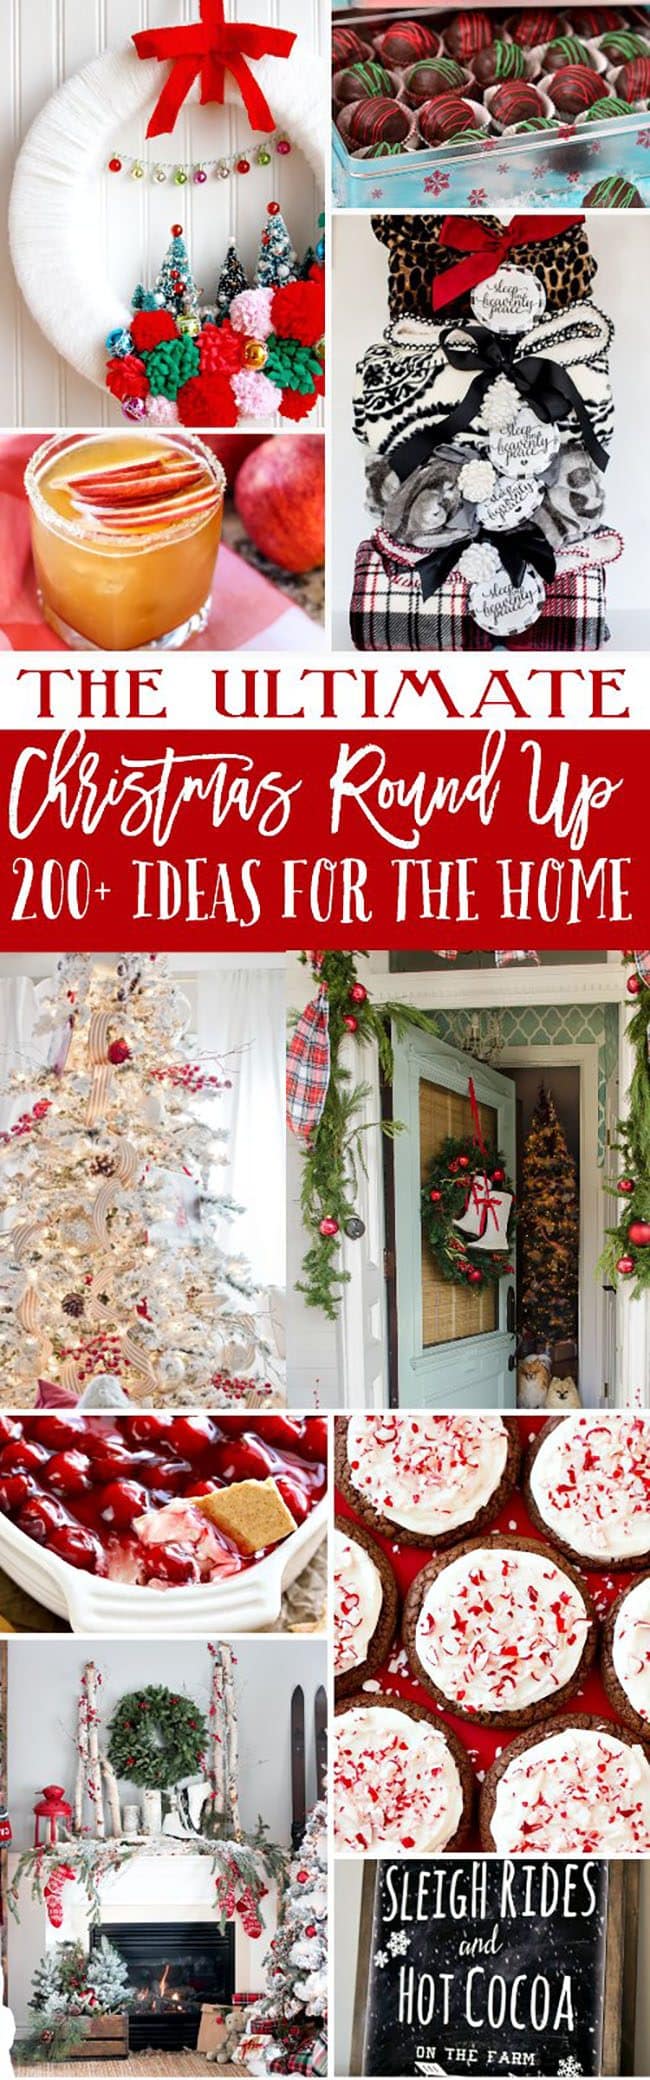 The Ultimate Christmas Round Up! Over 200 ideas for the home, gifts and recipes to make. You’ll find homemade Christmas treats, drinks and appetizers, to party ideas, printables, gifts, Christmas decor and more at TidyMom.net